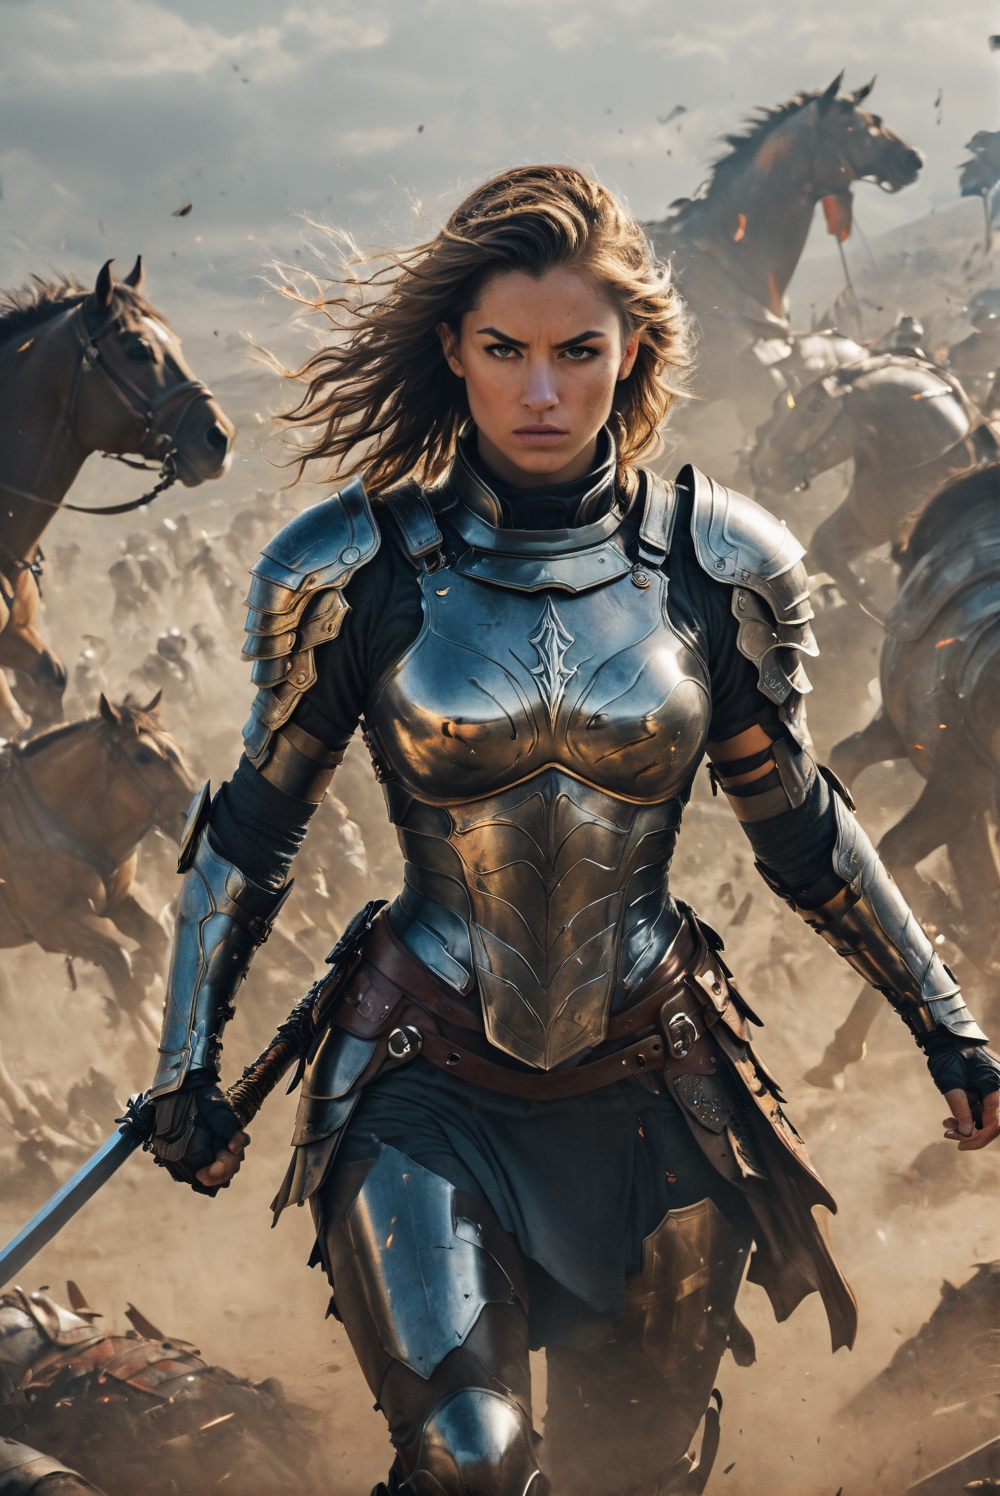 A fierce and beautiful female warrior standing in a battlefield. She is wearing a full suit of armor, including a helmet, chest plate, and greaves. She is wielding a sword in one hand and a shield in the other. Her hair is flowing in the wind and she has a determined look on her face. The background is a chaotic battlefield with soldiers fighting and horses rearing.,cyberpunk style